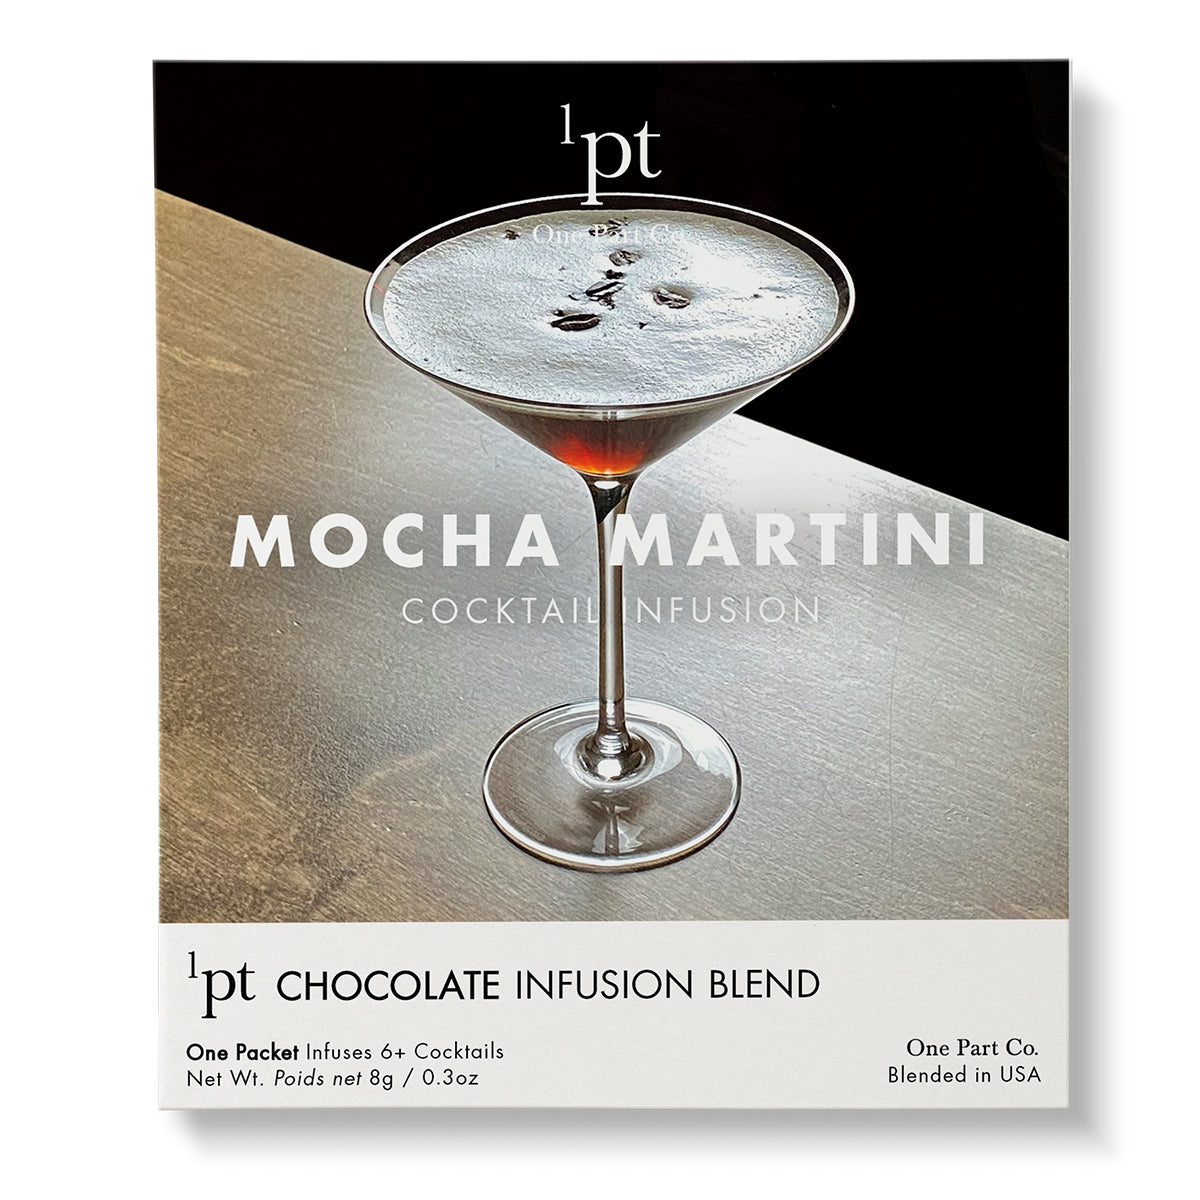 1PT-MOCHA MARTINI COCKTAIL INFUSION CHOCOLATE BLEND - Molly's! A Chic and Unique Boutique 